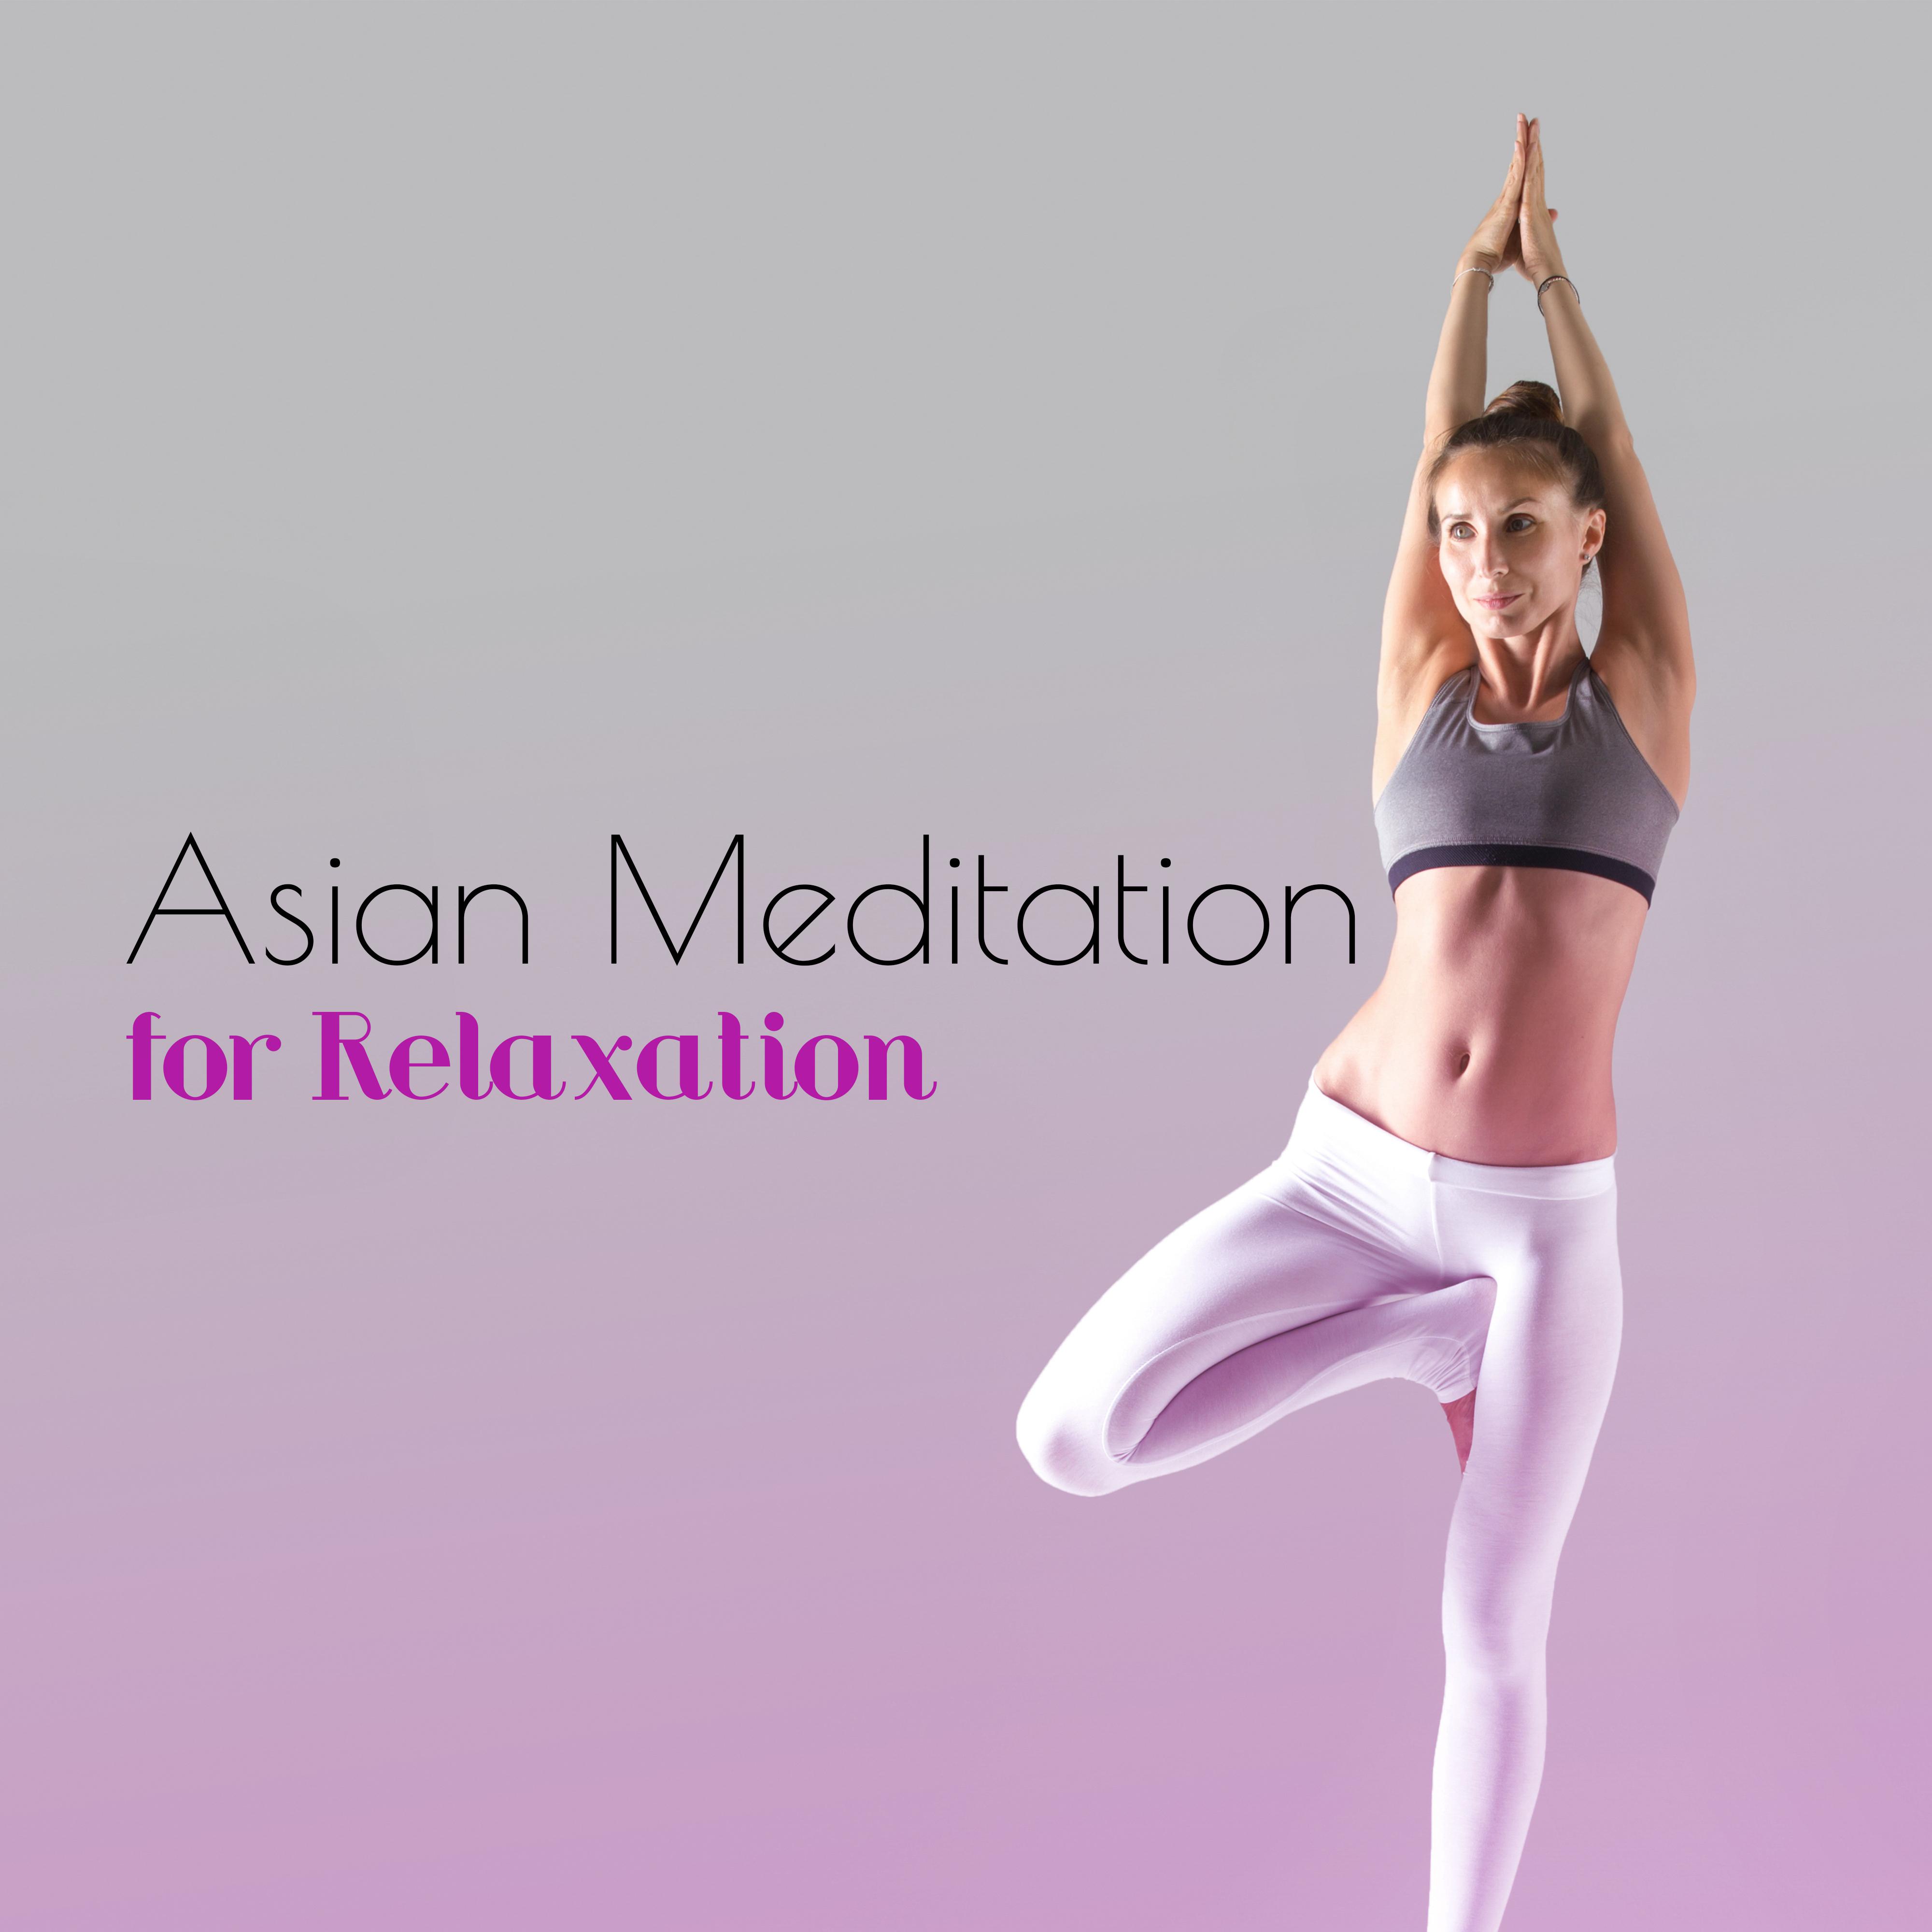 Asian Meditation for Relaxation